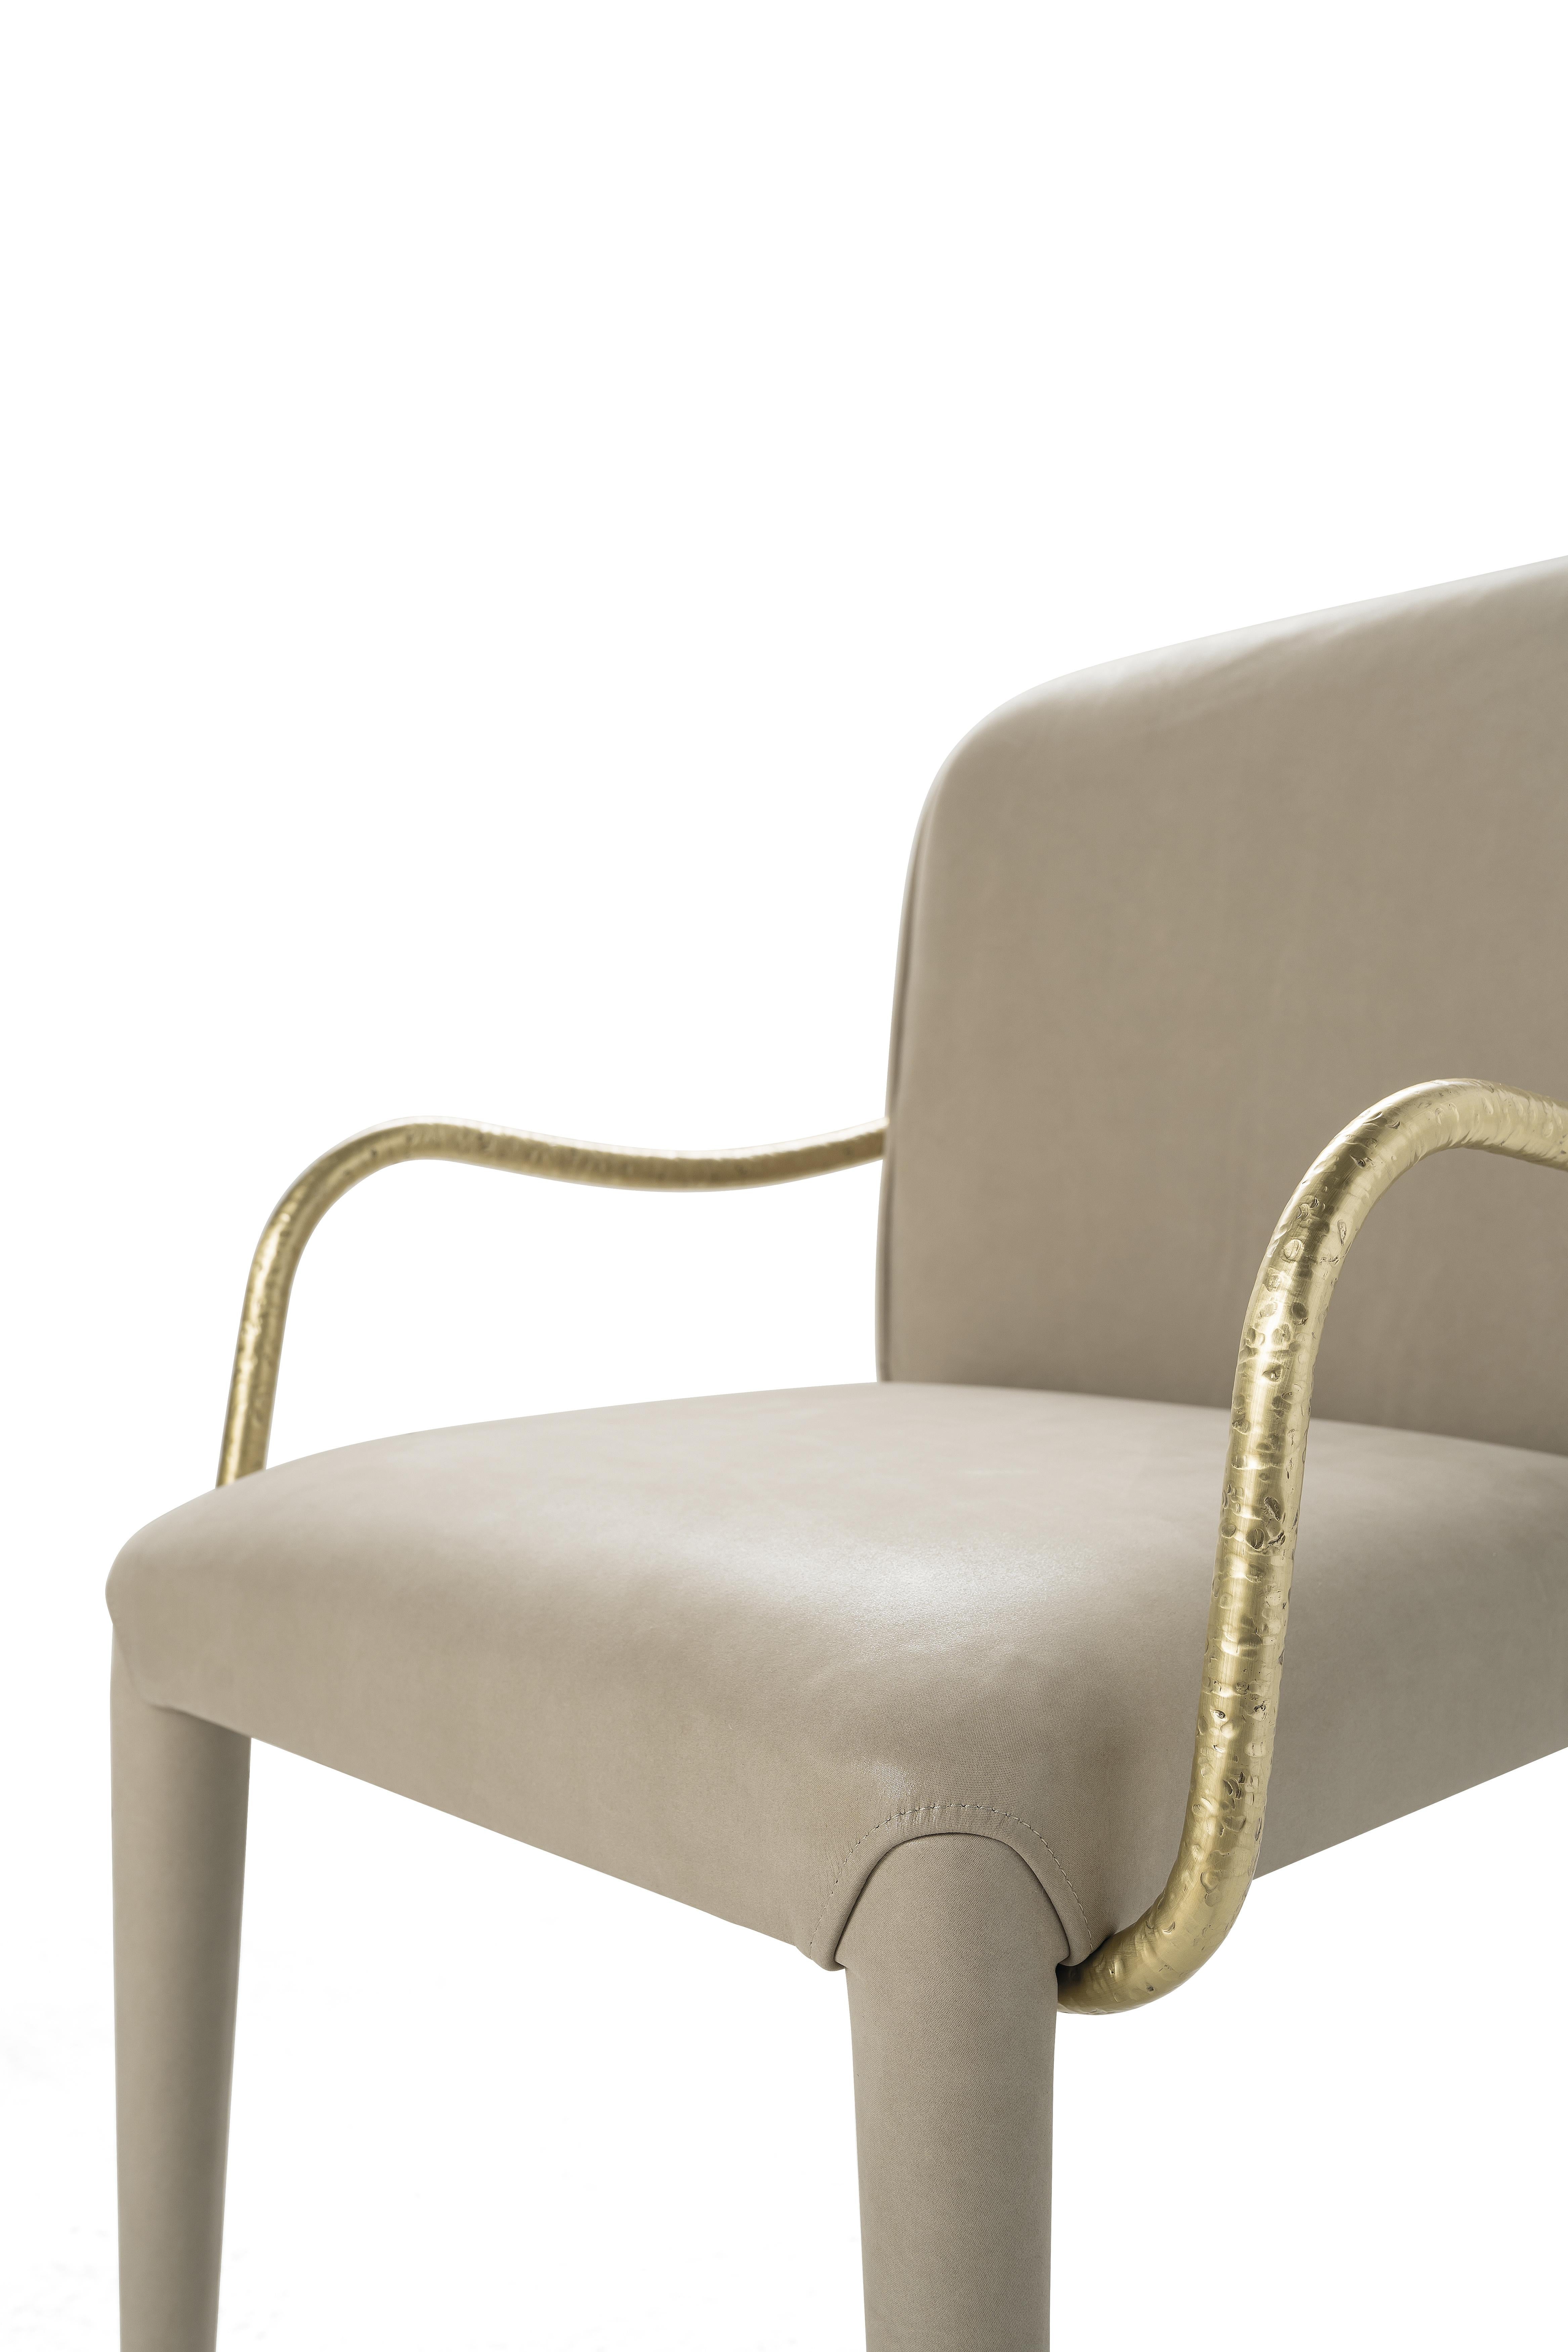 Contemporary 21st Century Kivu Chair in Leather by Roberto Cavalli Home Interiors For Sale